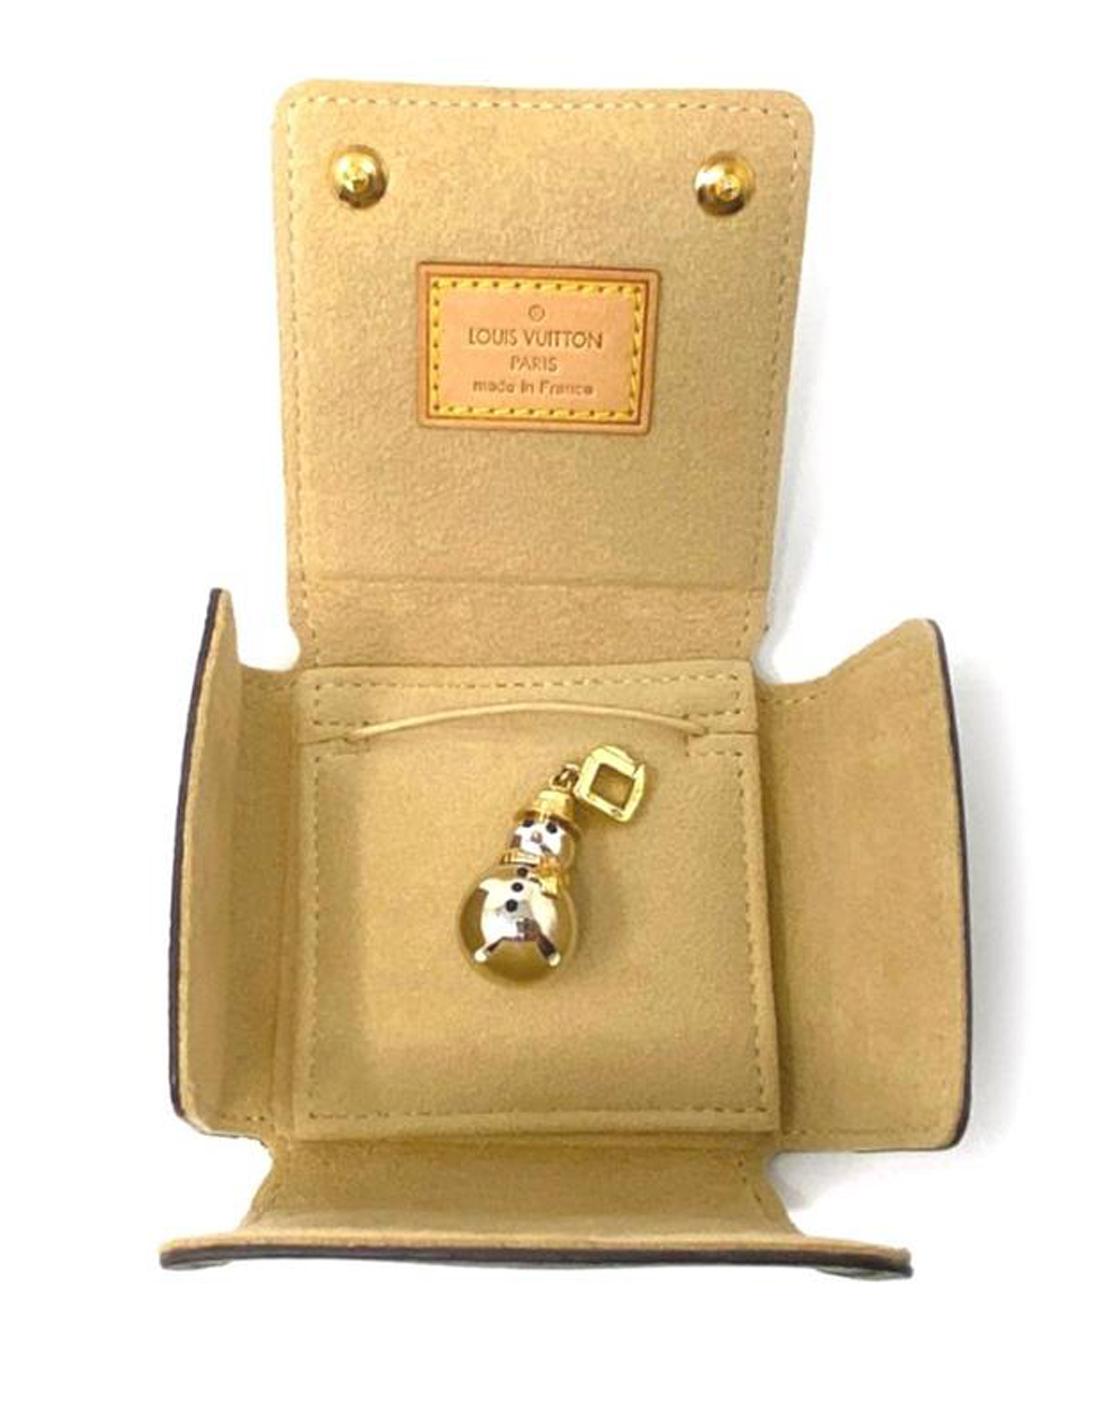 This is a rare authentic collectible charm by Louis Vuitton, it is crafted from 18k white and yellow gold with a high polished finish. His head and body is in white gold with yellow gold hat and scarf in yellow gold. Black onyx eyes and buttons.